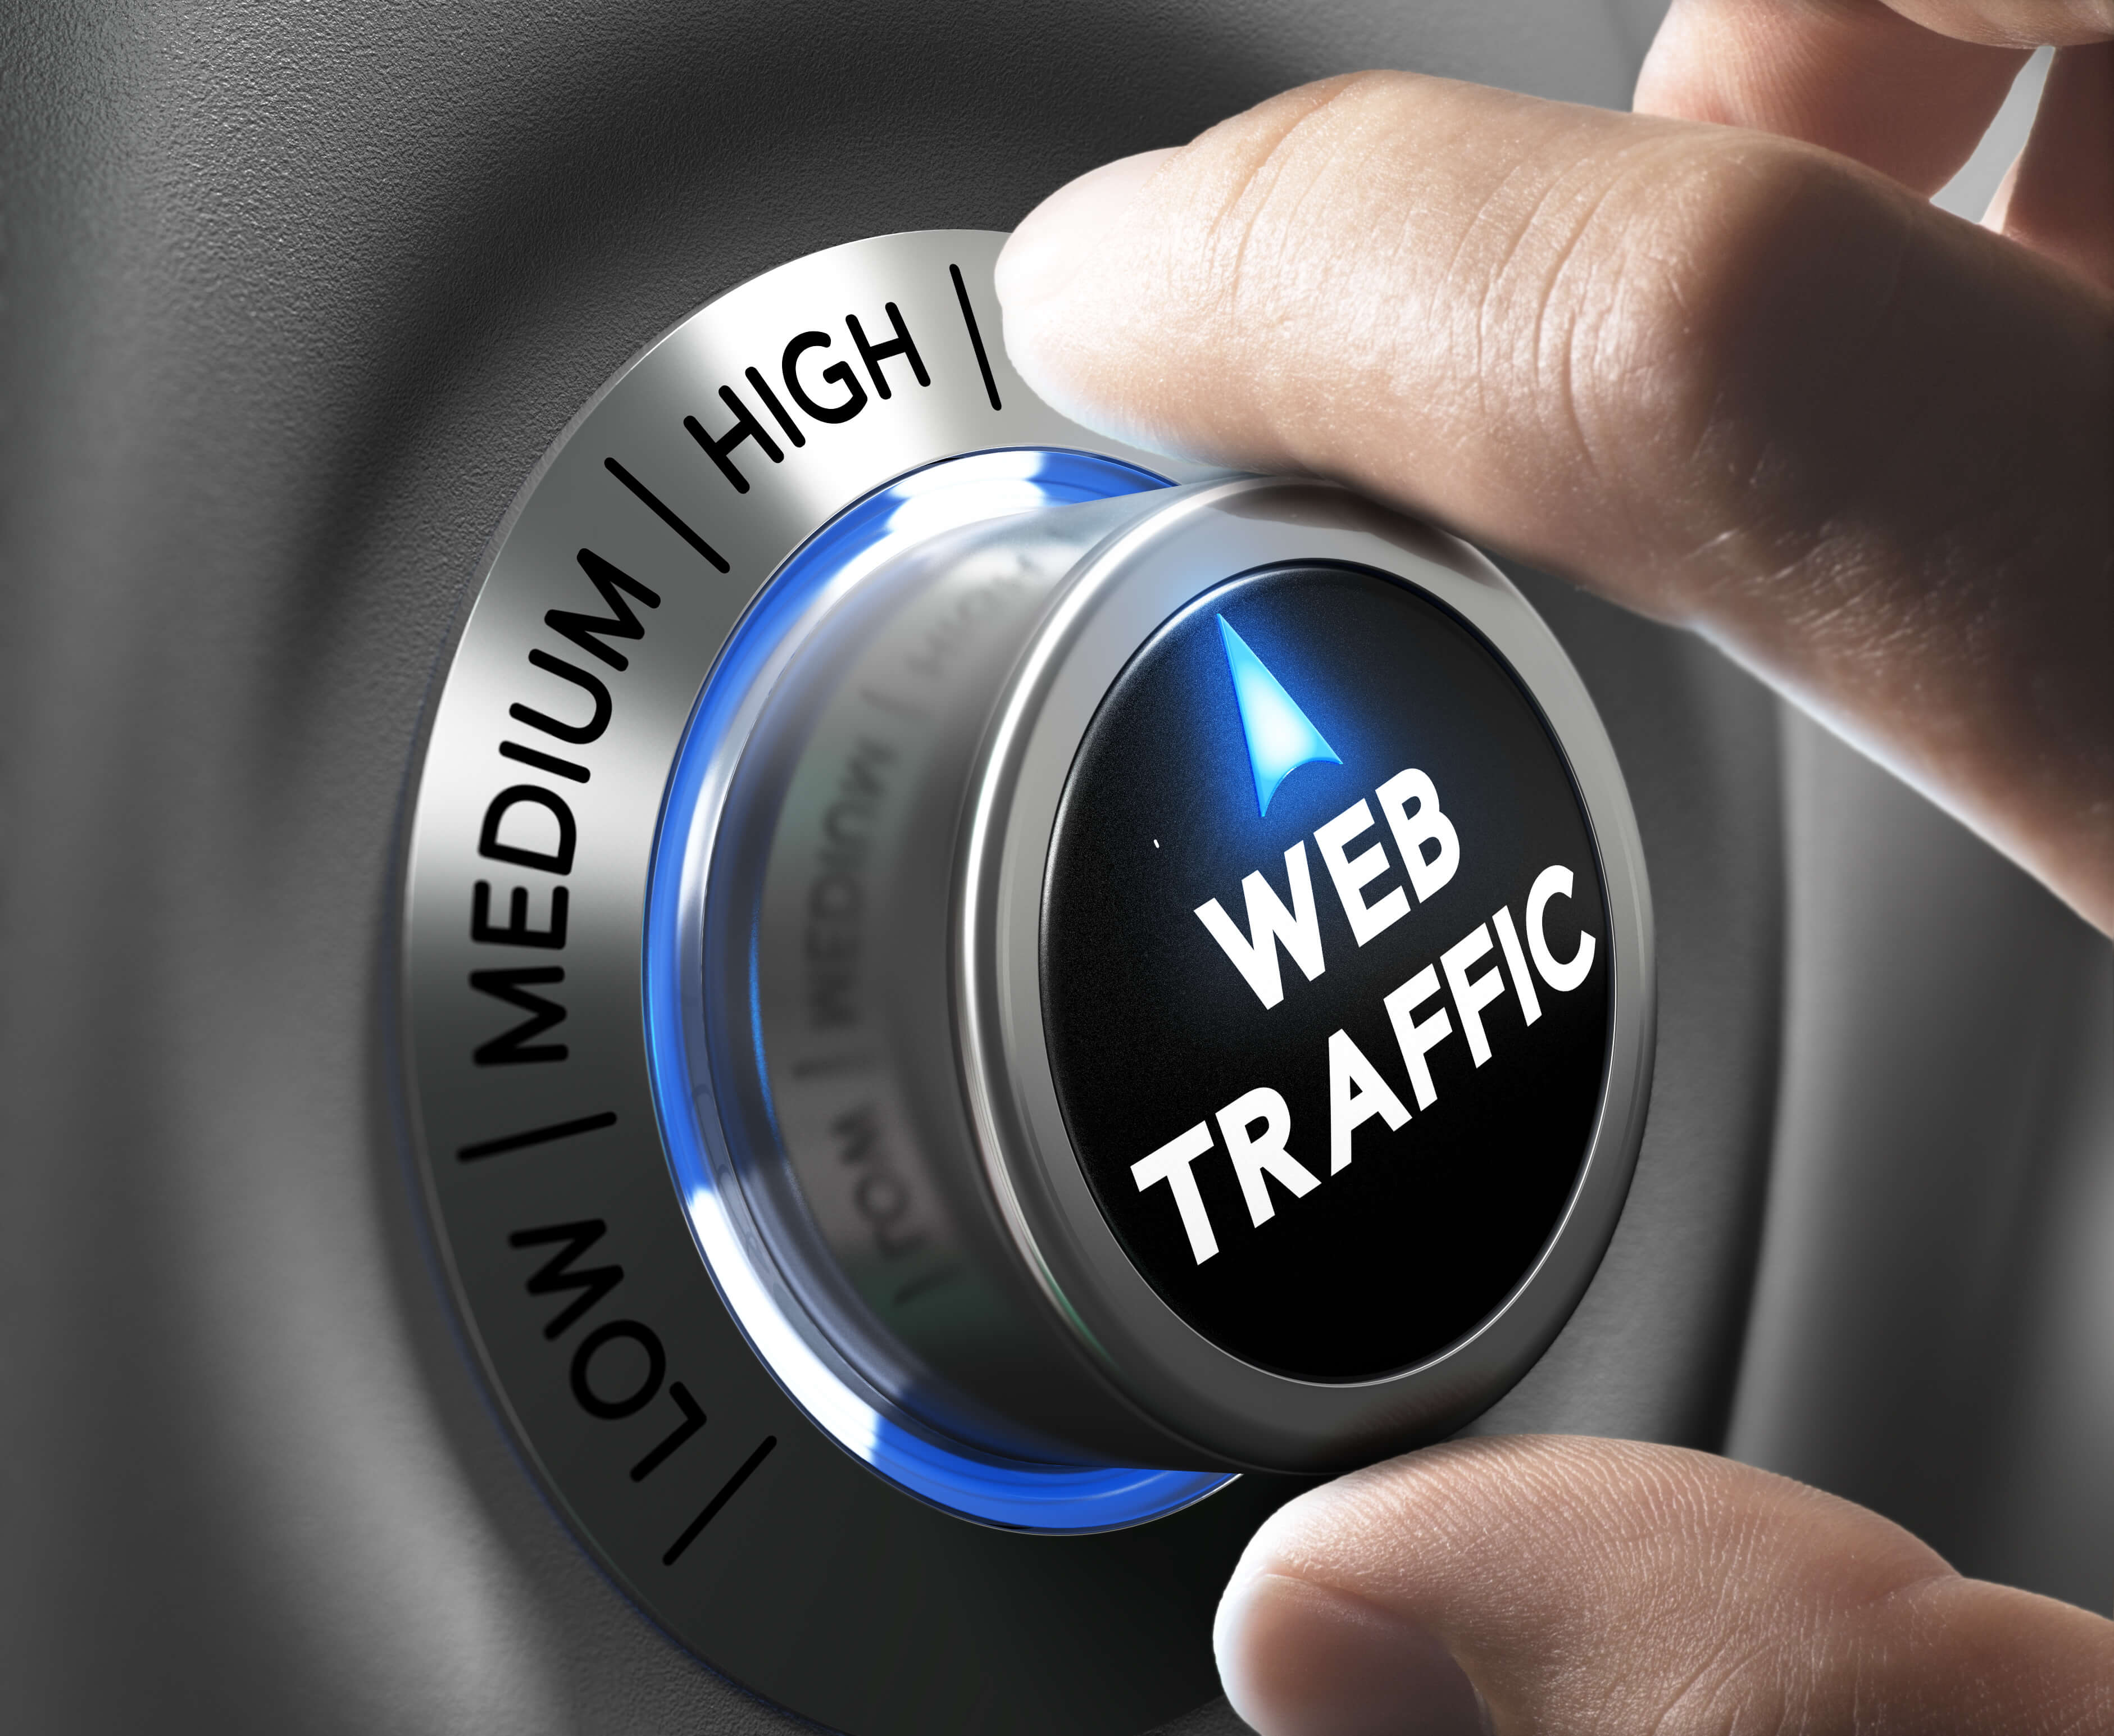 Web traffic button pointing high position